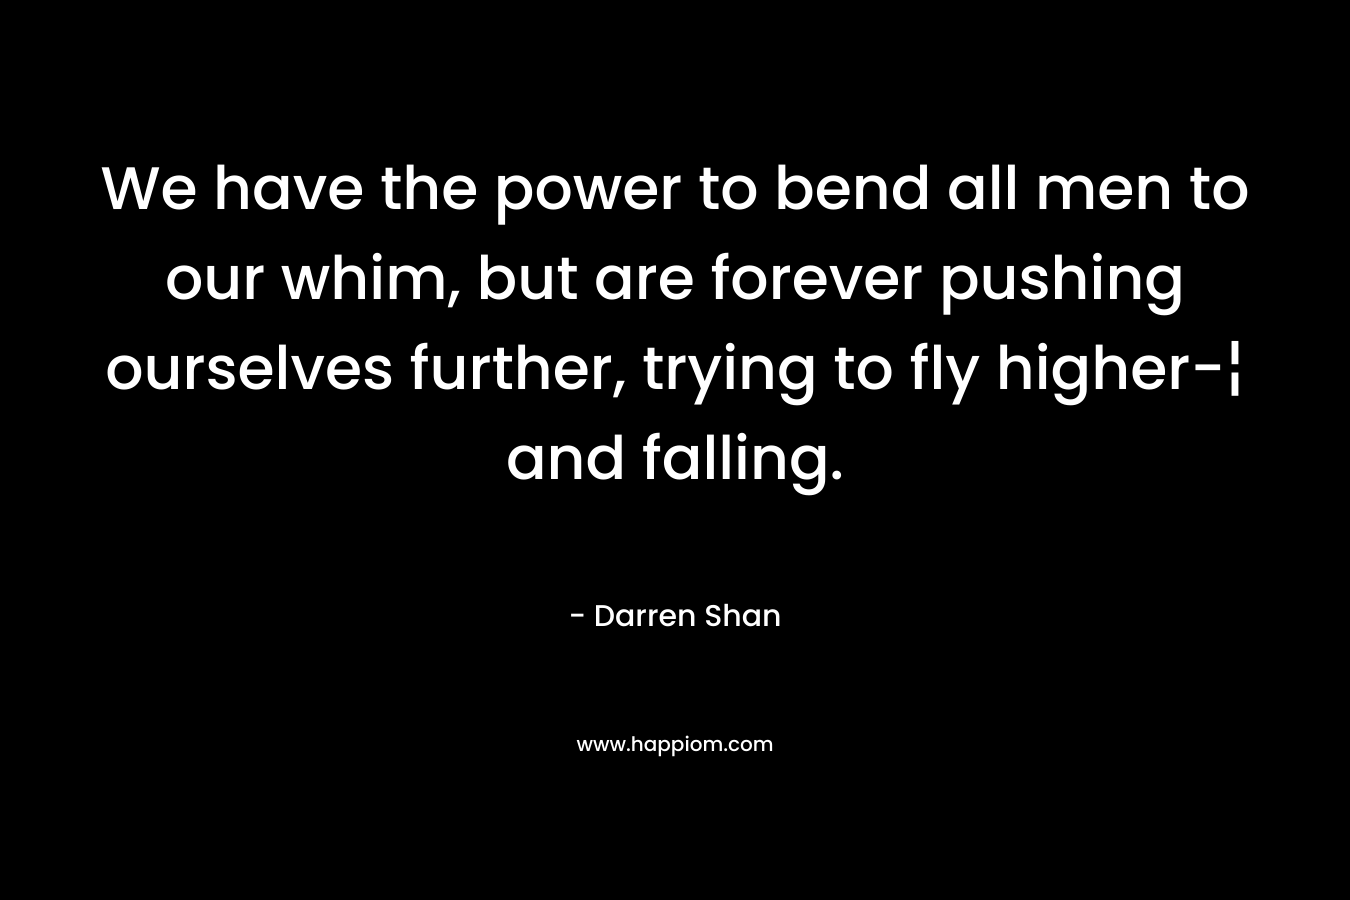 We have the power to bend all men to our whim, but are forever pushing ourselves further, trying to fly higher-¦ and falling. – Darren Shan